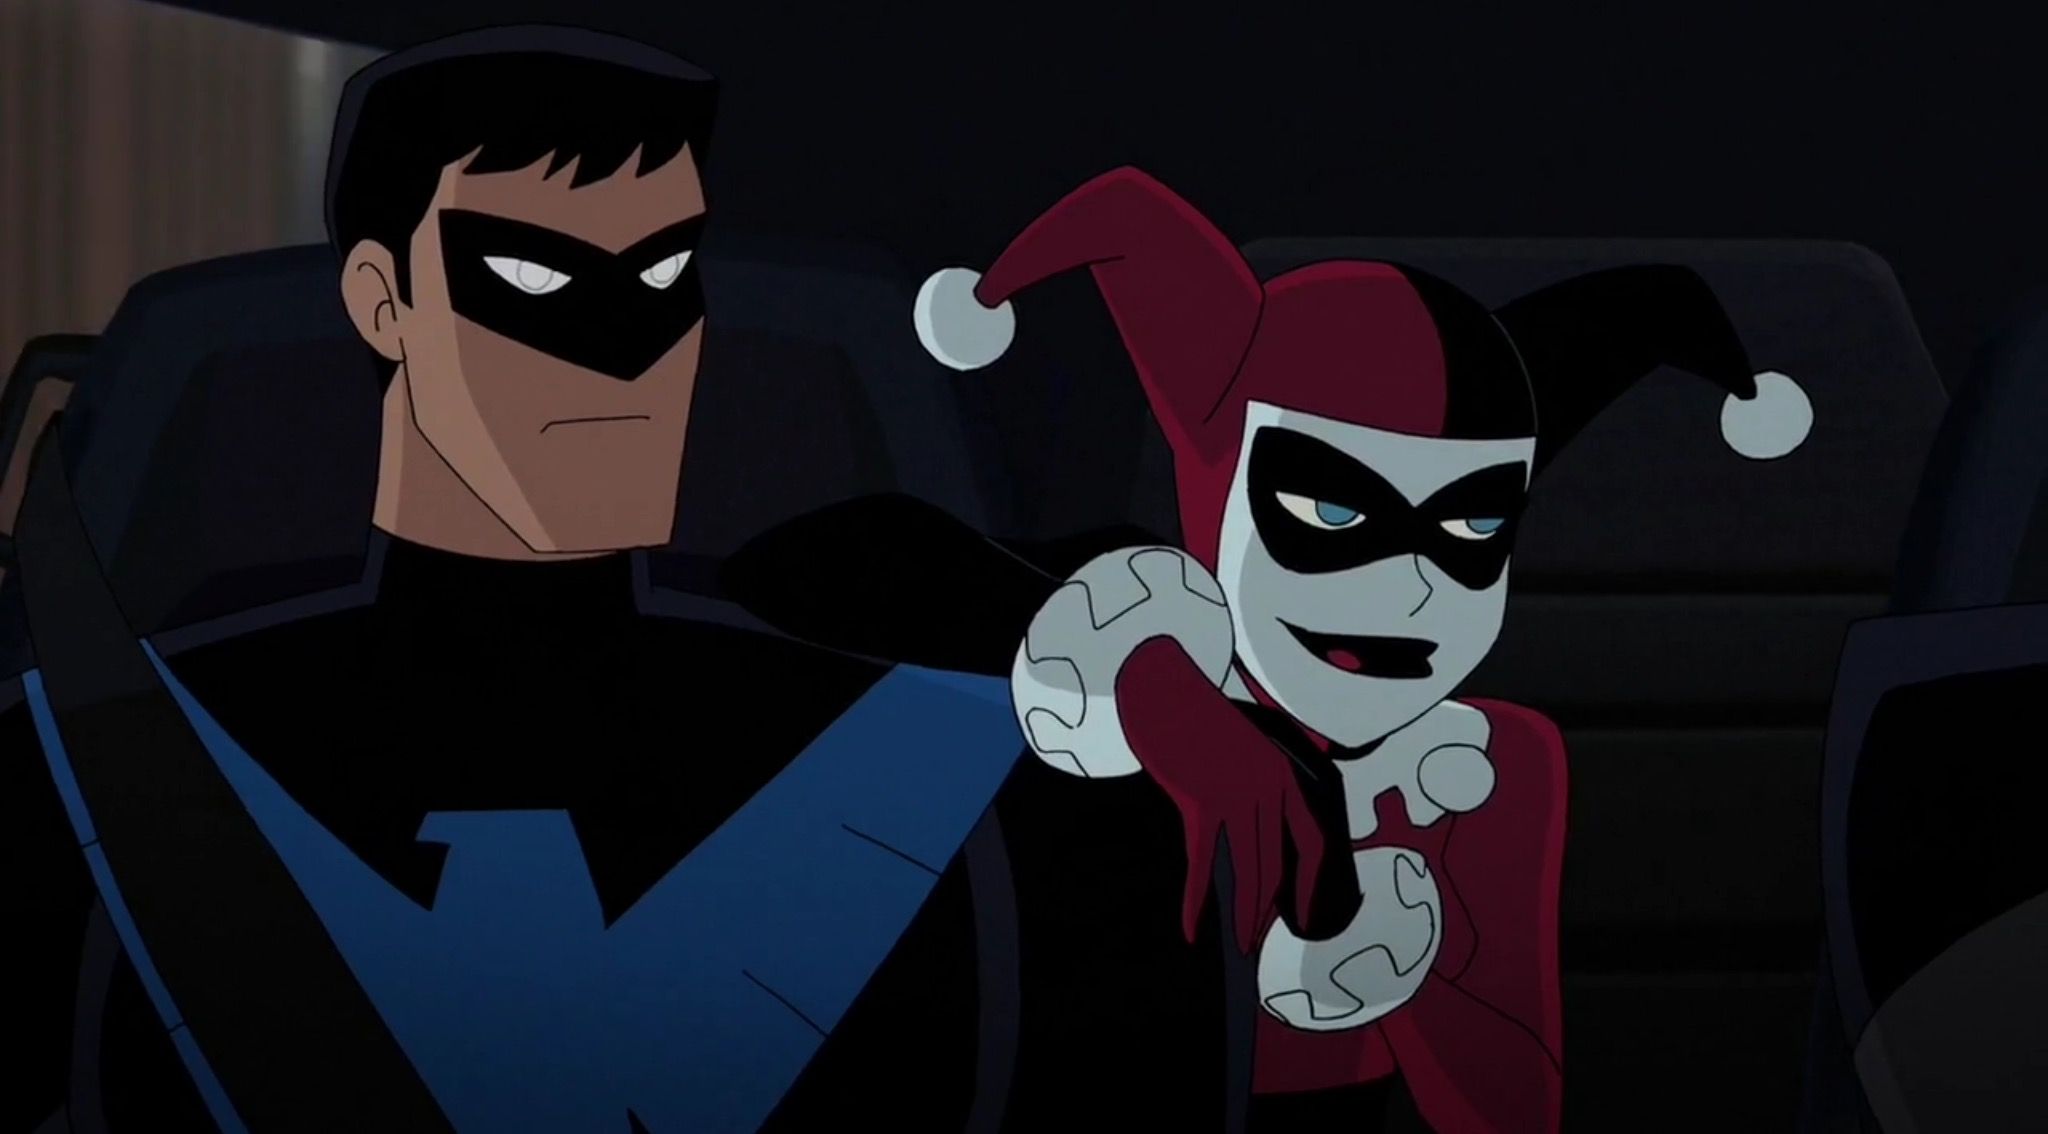 Batman and Harley Quinn Picture